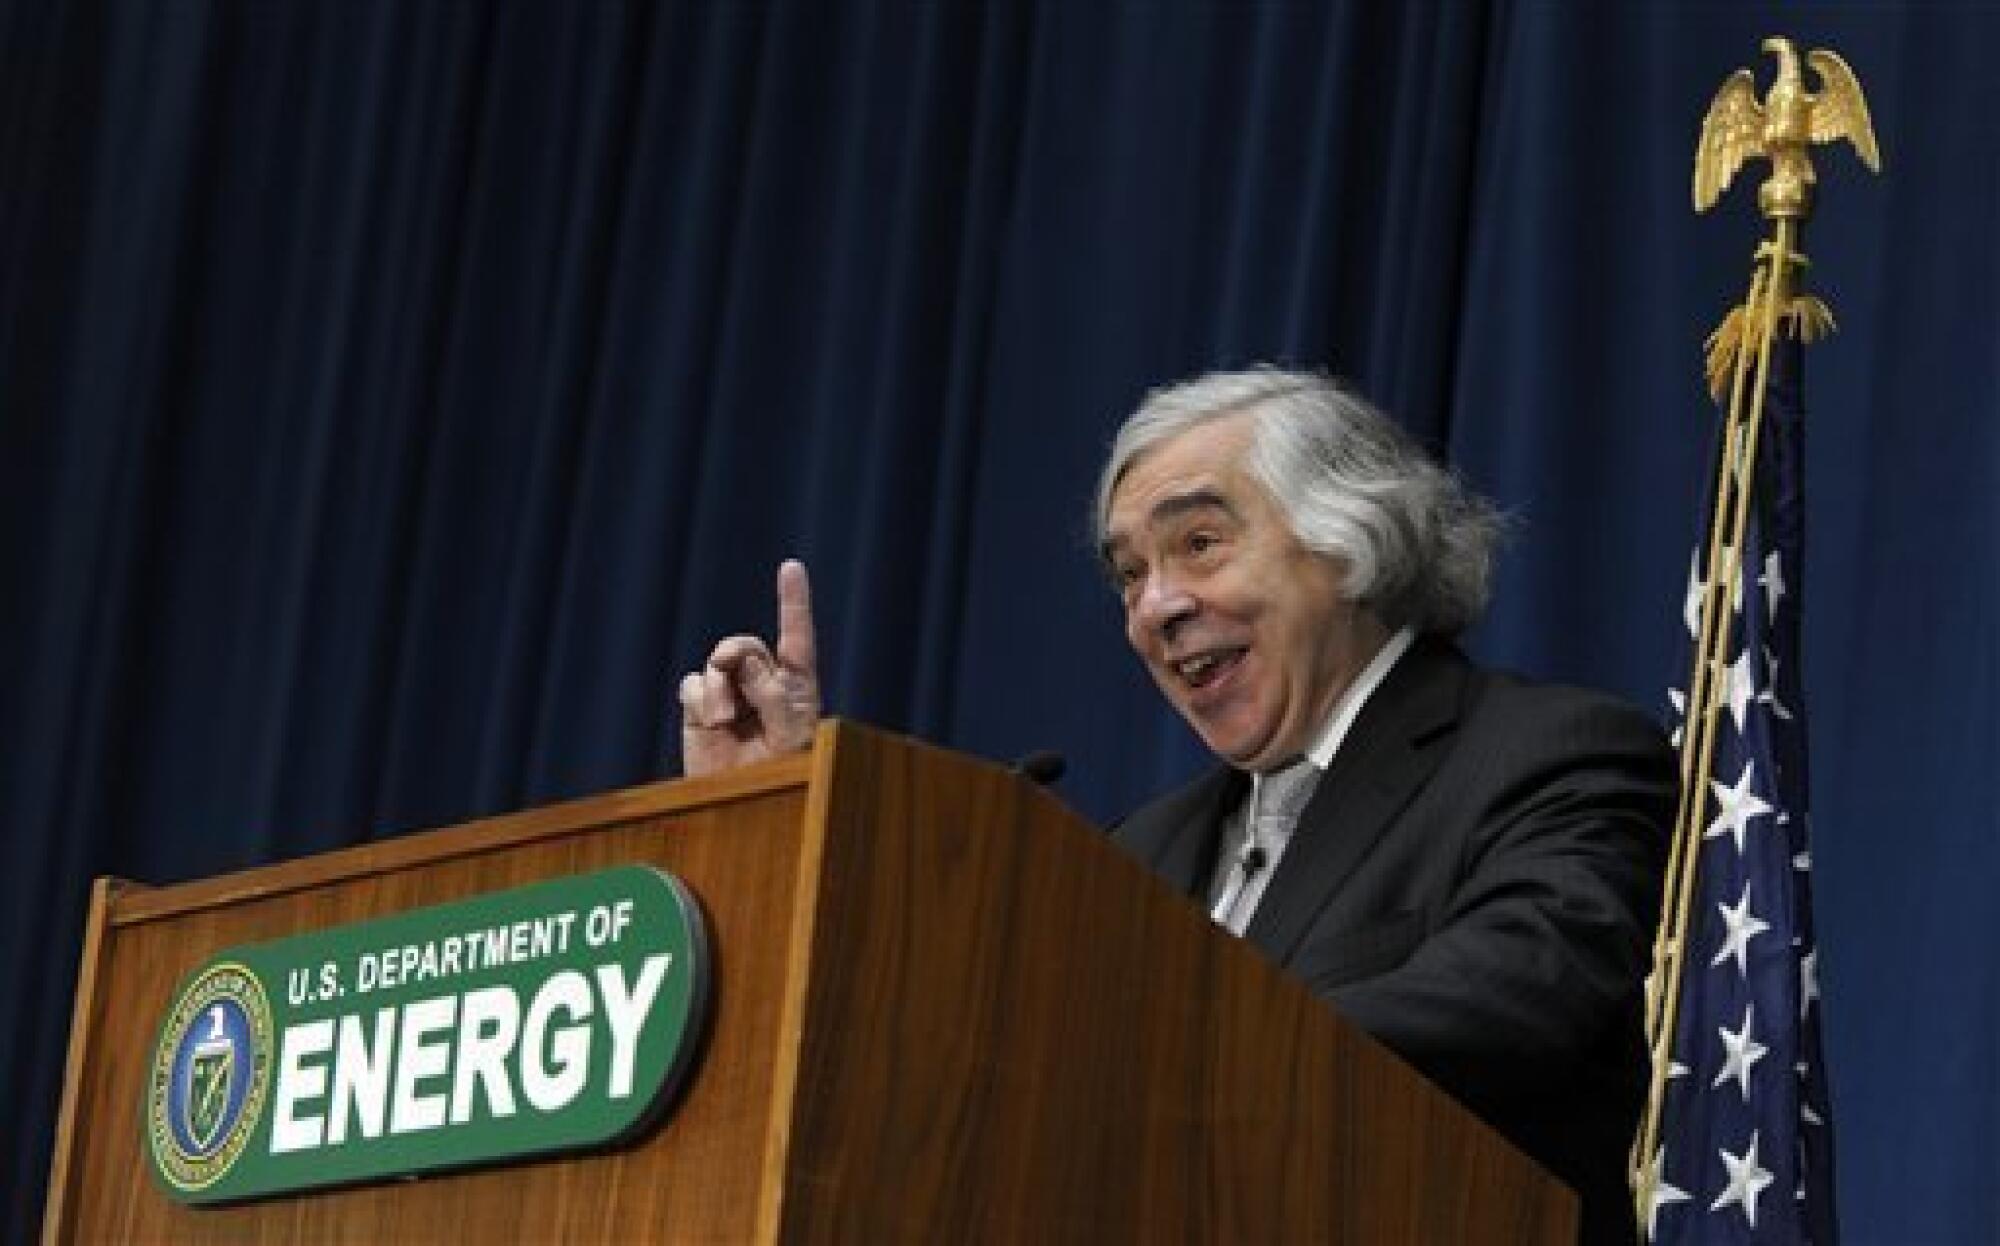 Dr. Ernest Moniz speaks after being sworn in as Energy Secretary, Tuesday, May 21, 2013, during a ceremony at the Energy Department in Washington.